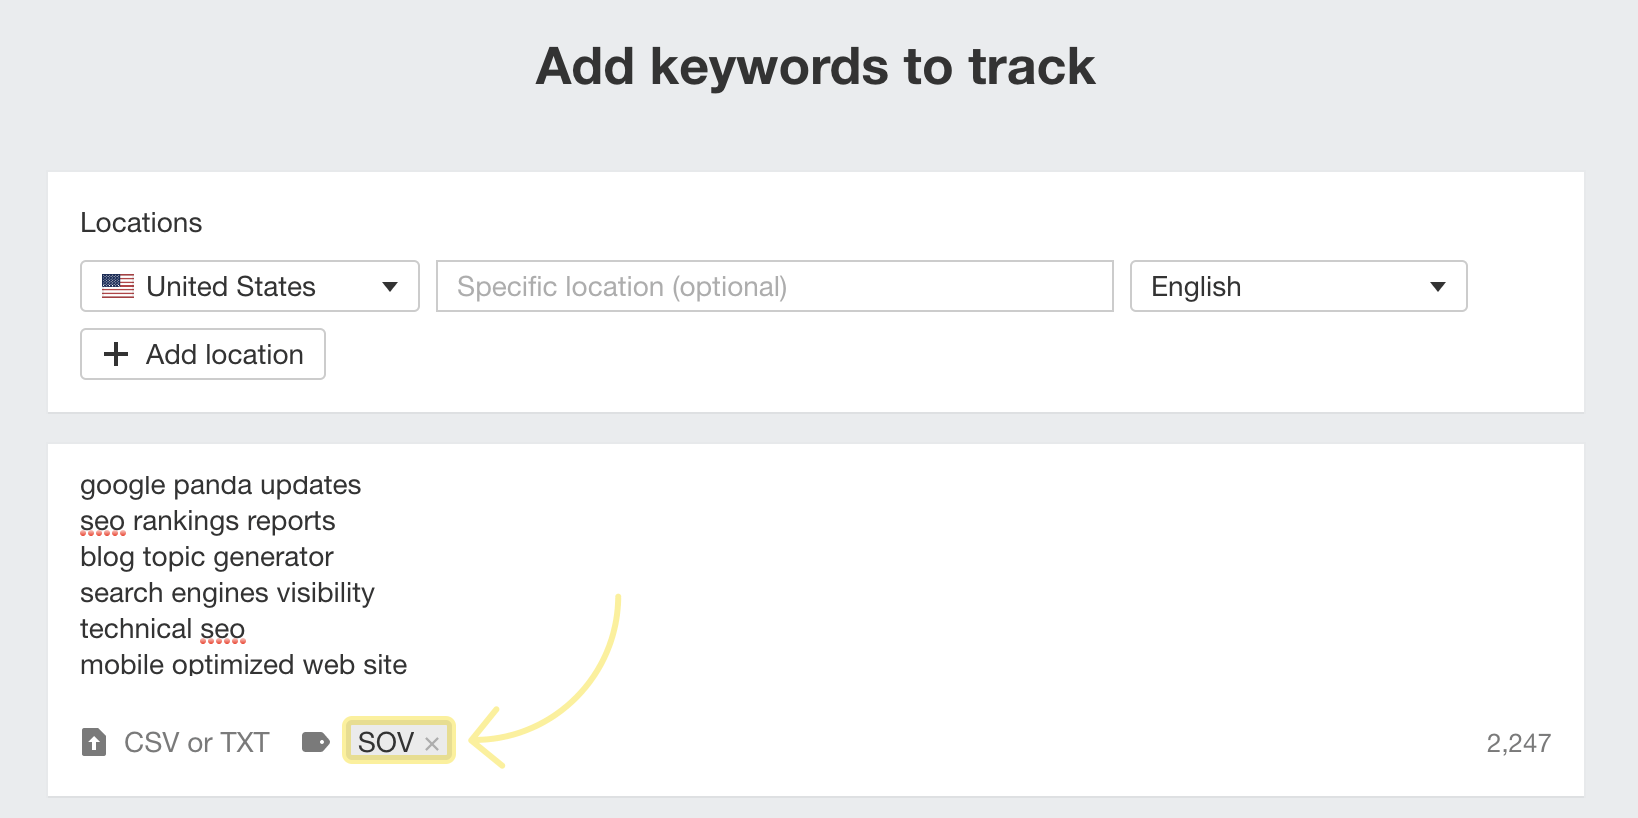 Adding keywords to track search visibility
